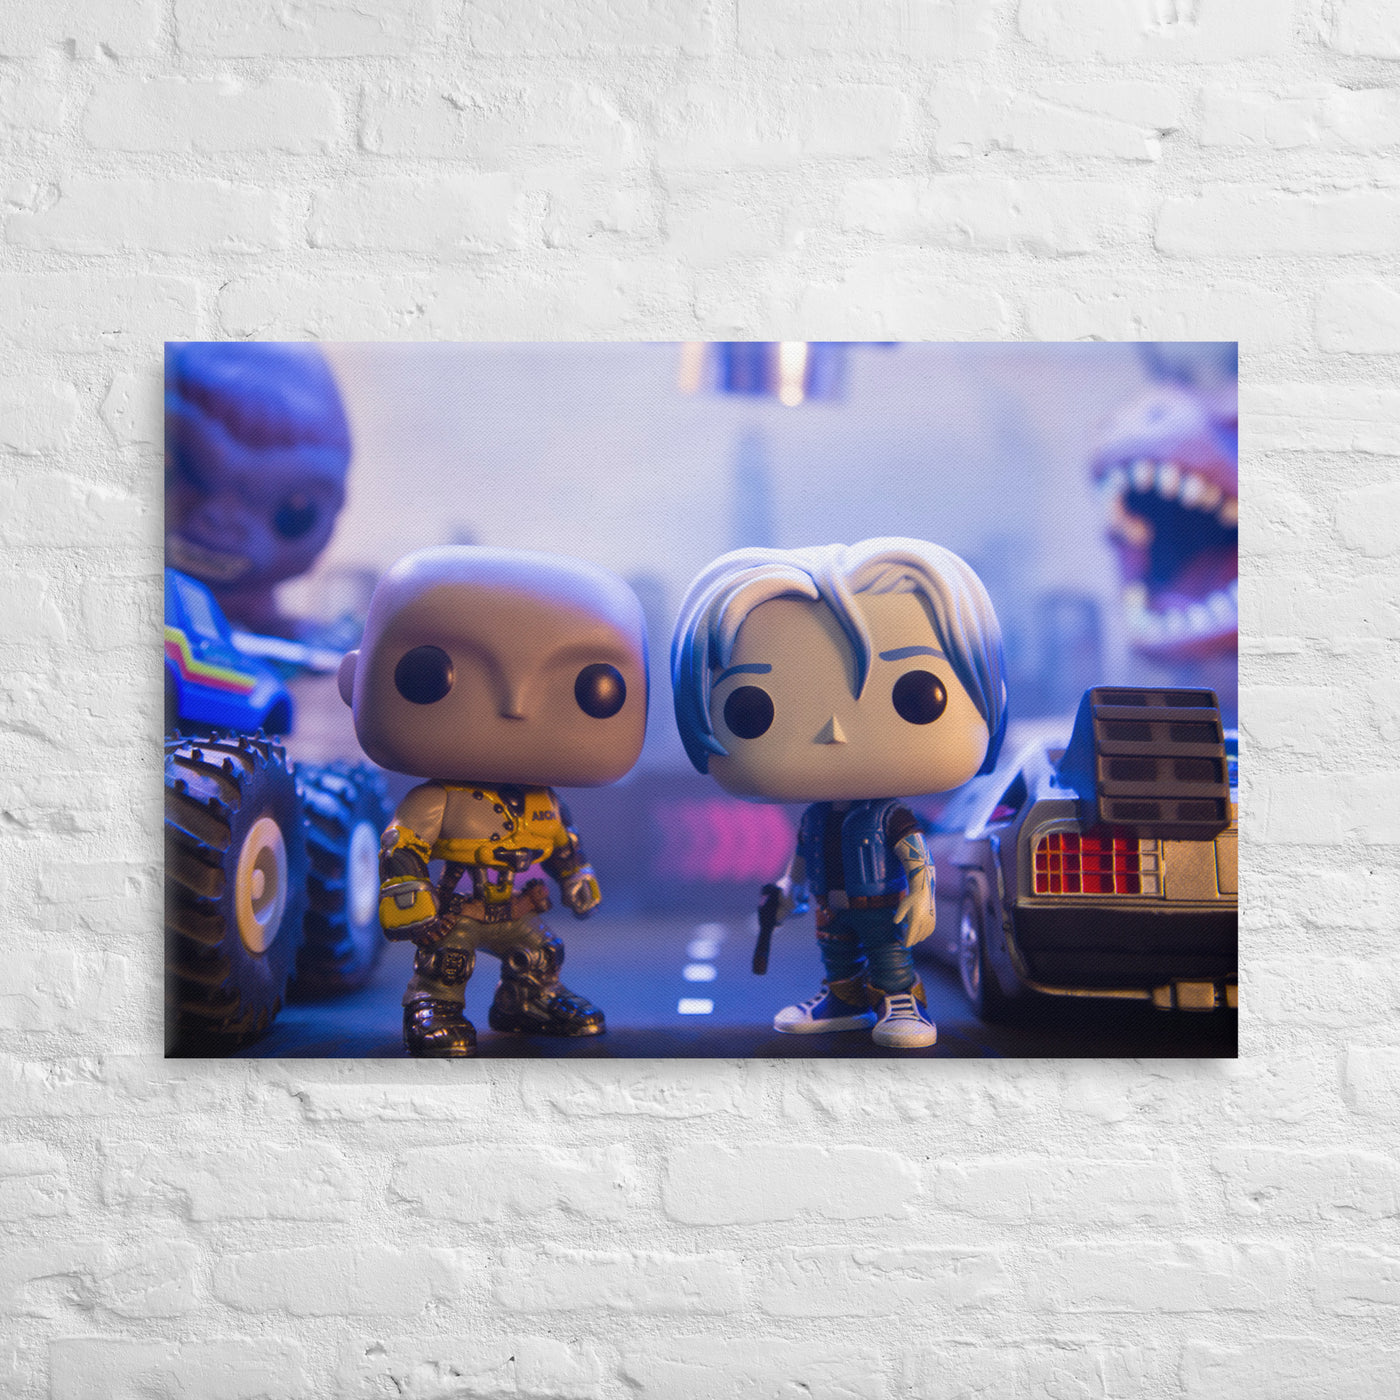 Ready Player One Funko Pop Photography Giant Canvas by UrbanRoxStarr